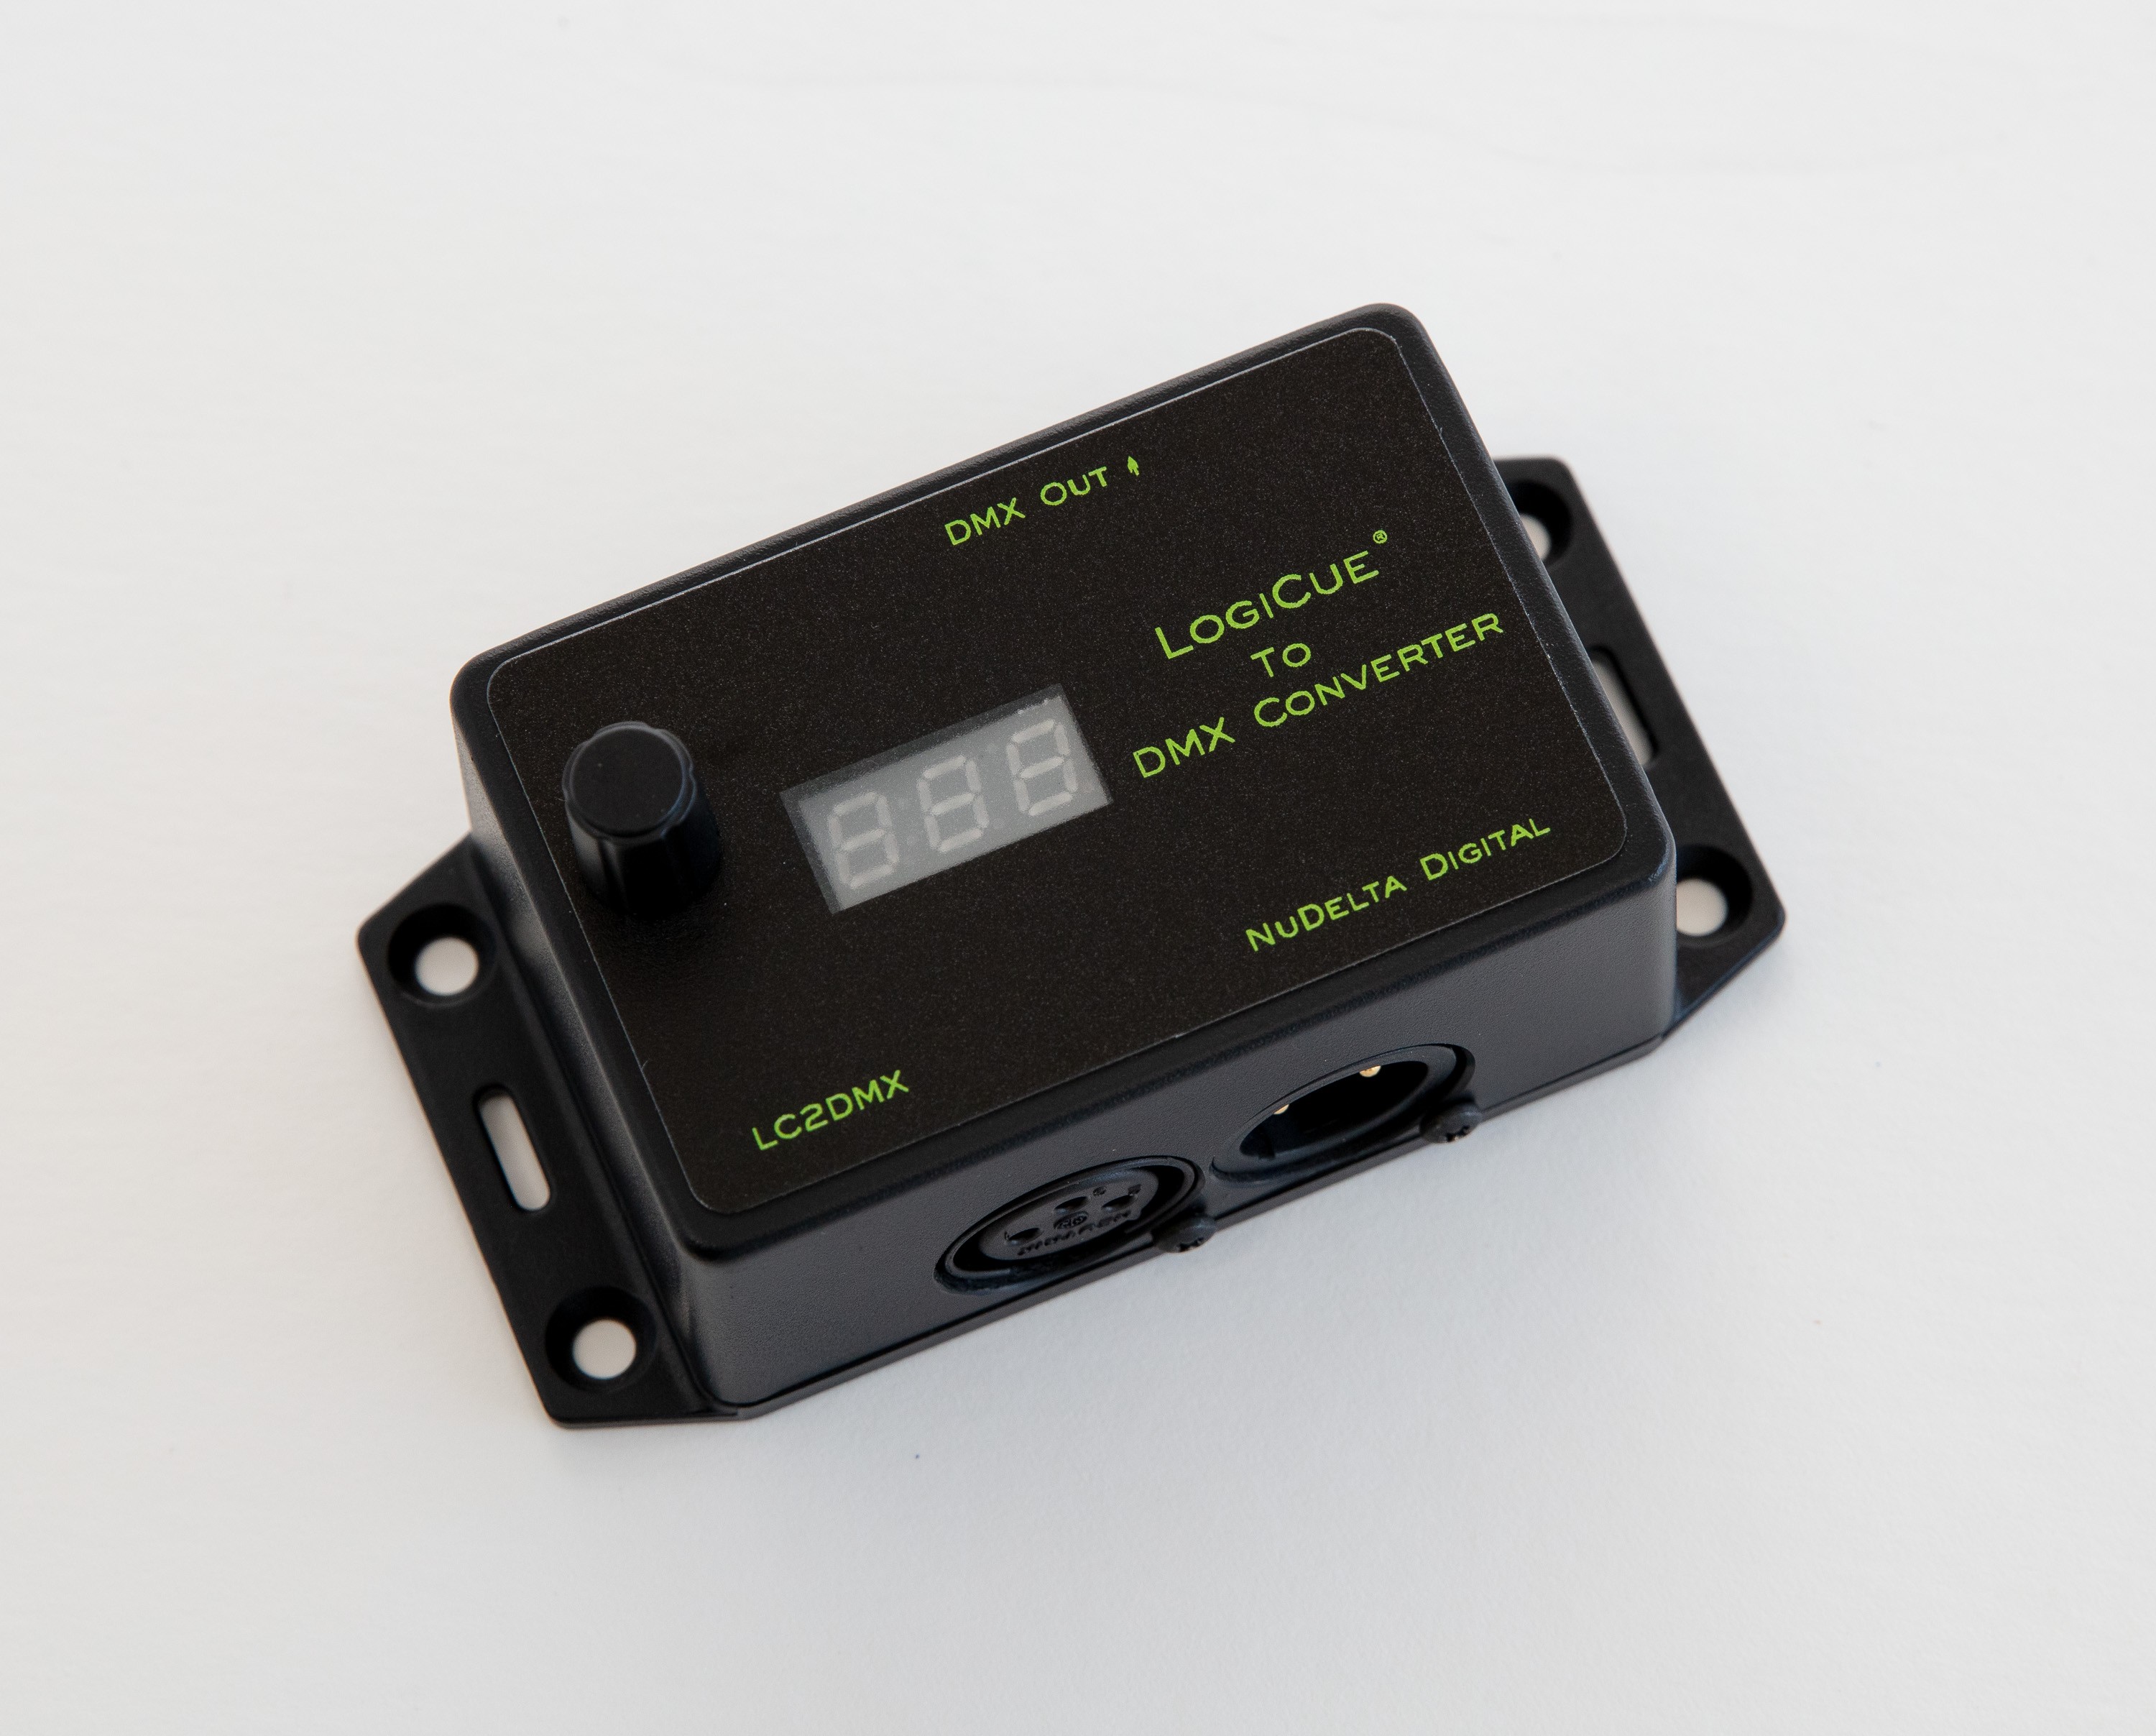 A picture of the LC2DMX which is a DMX converter for the LogiCue System.